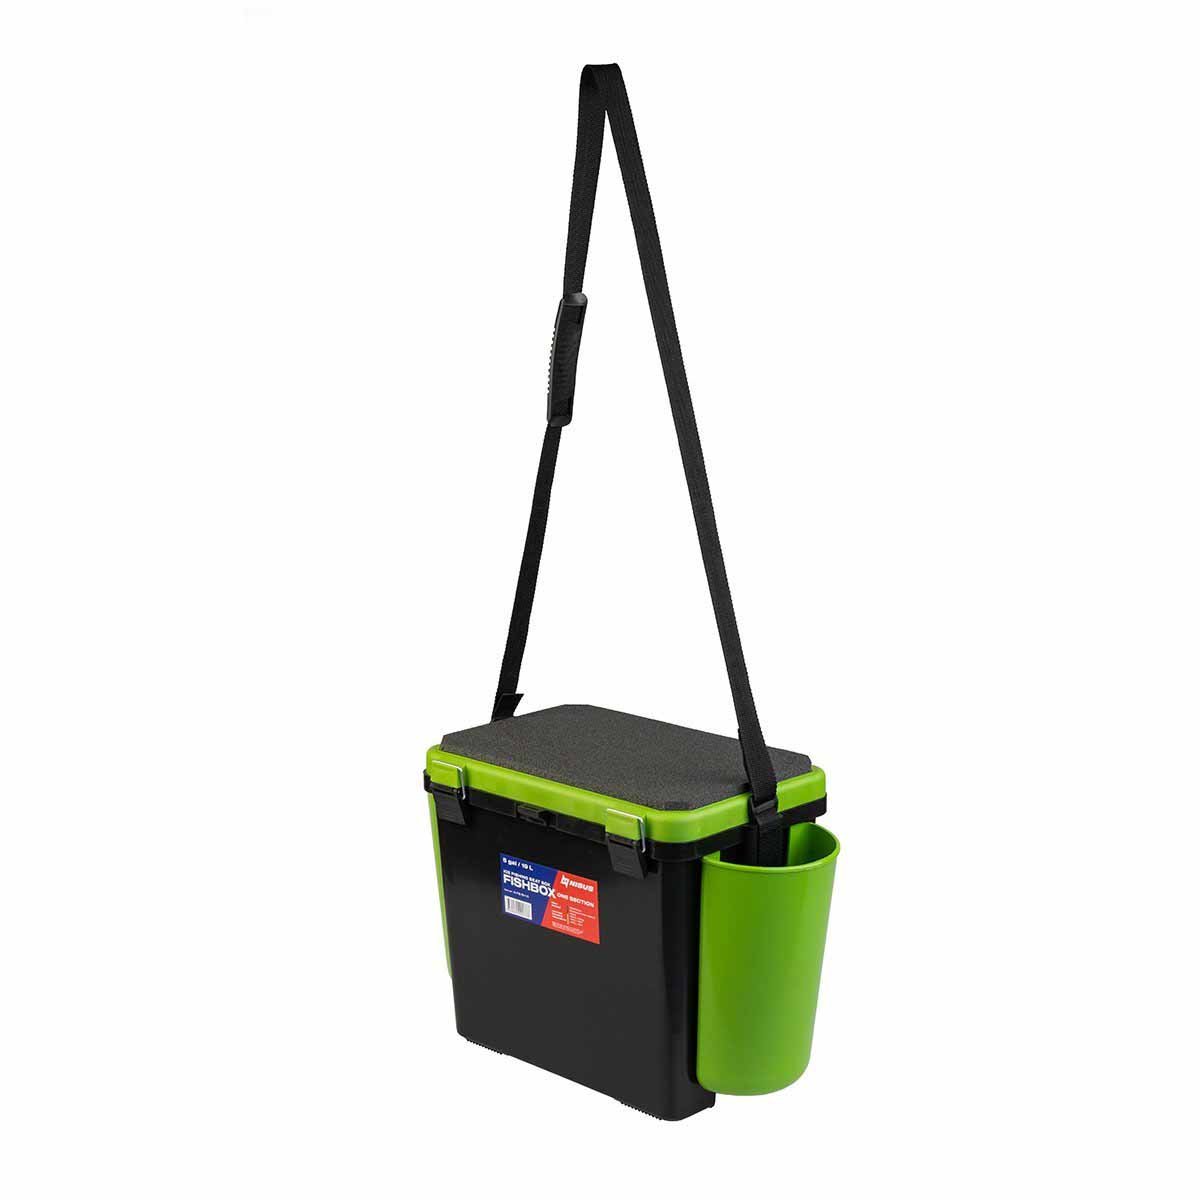 FishBox Large 5 gal SeatBox for Ice Fishing Tackle and Gear with adjustable shoulder strap, green